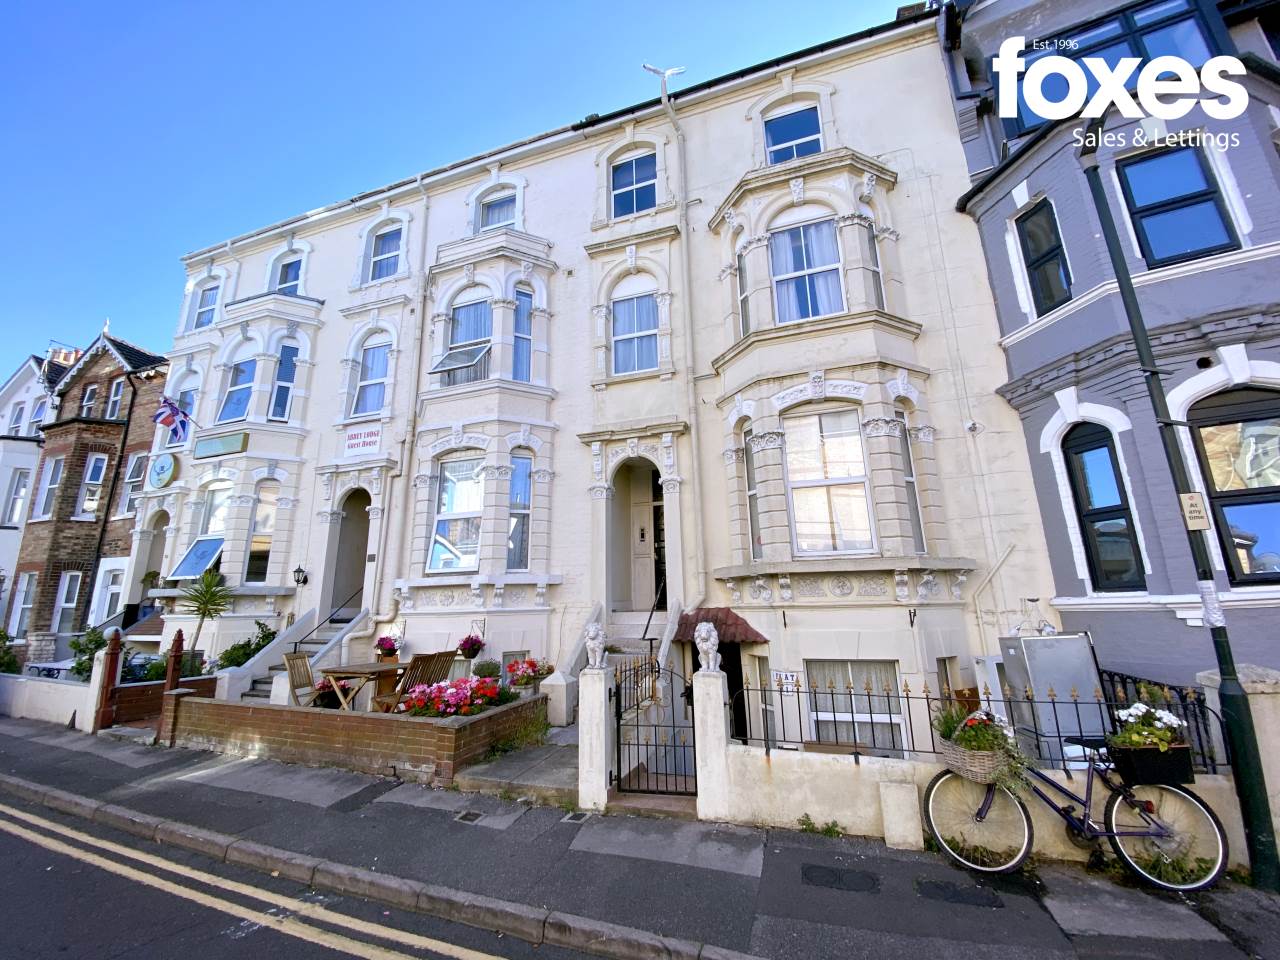 ONE BEDROOM FLAT | SPACIOUS ACCOMMODATION | REQUIRES SOME UPDATING | MINUTES FROM THE BEACH | TOWN CENTRE LOCATION | SHARE OF FREEHOLD